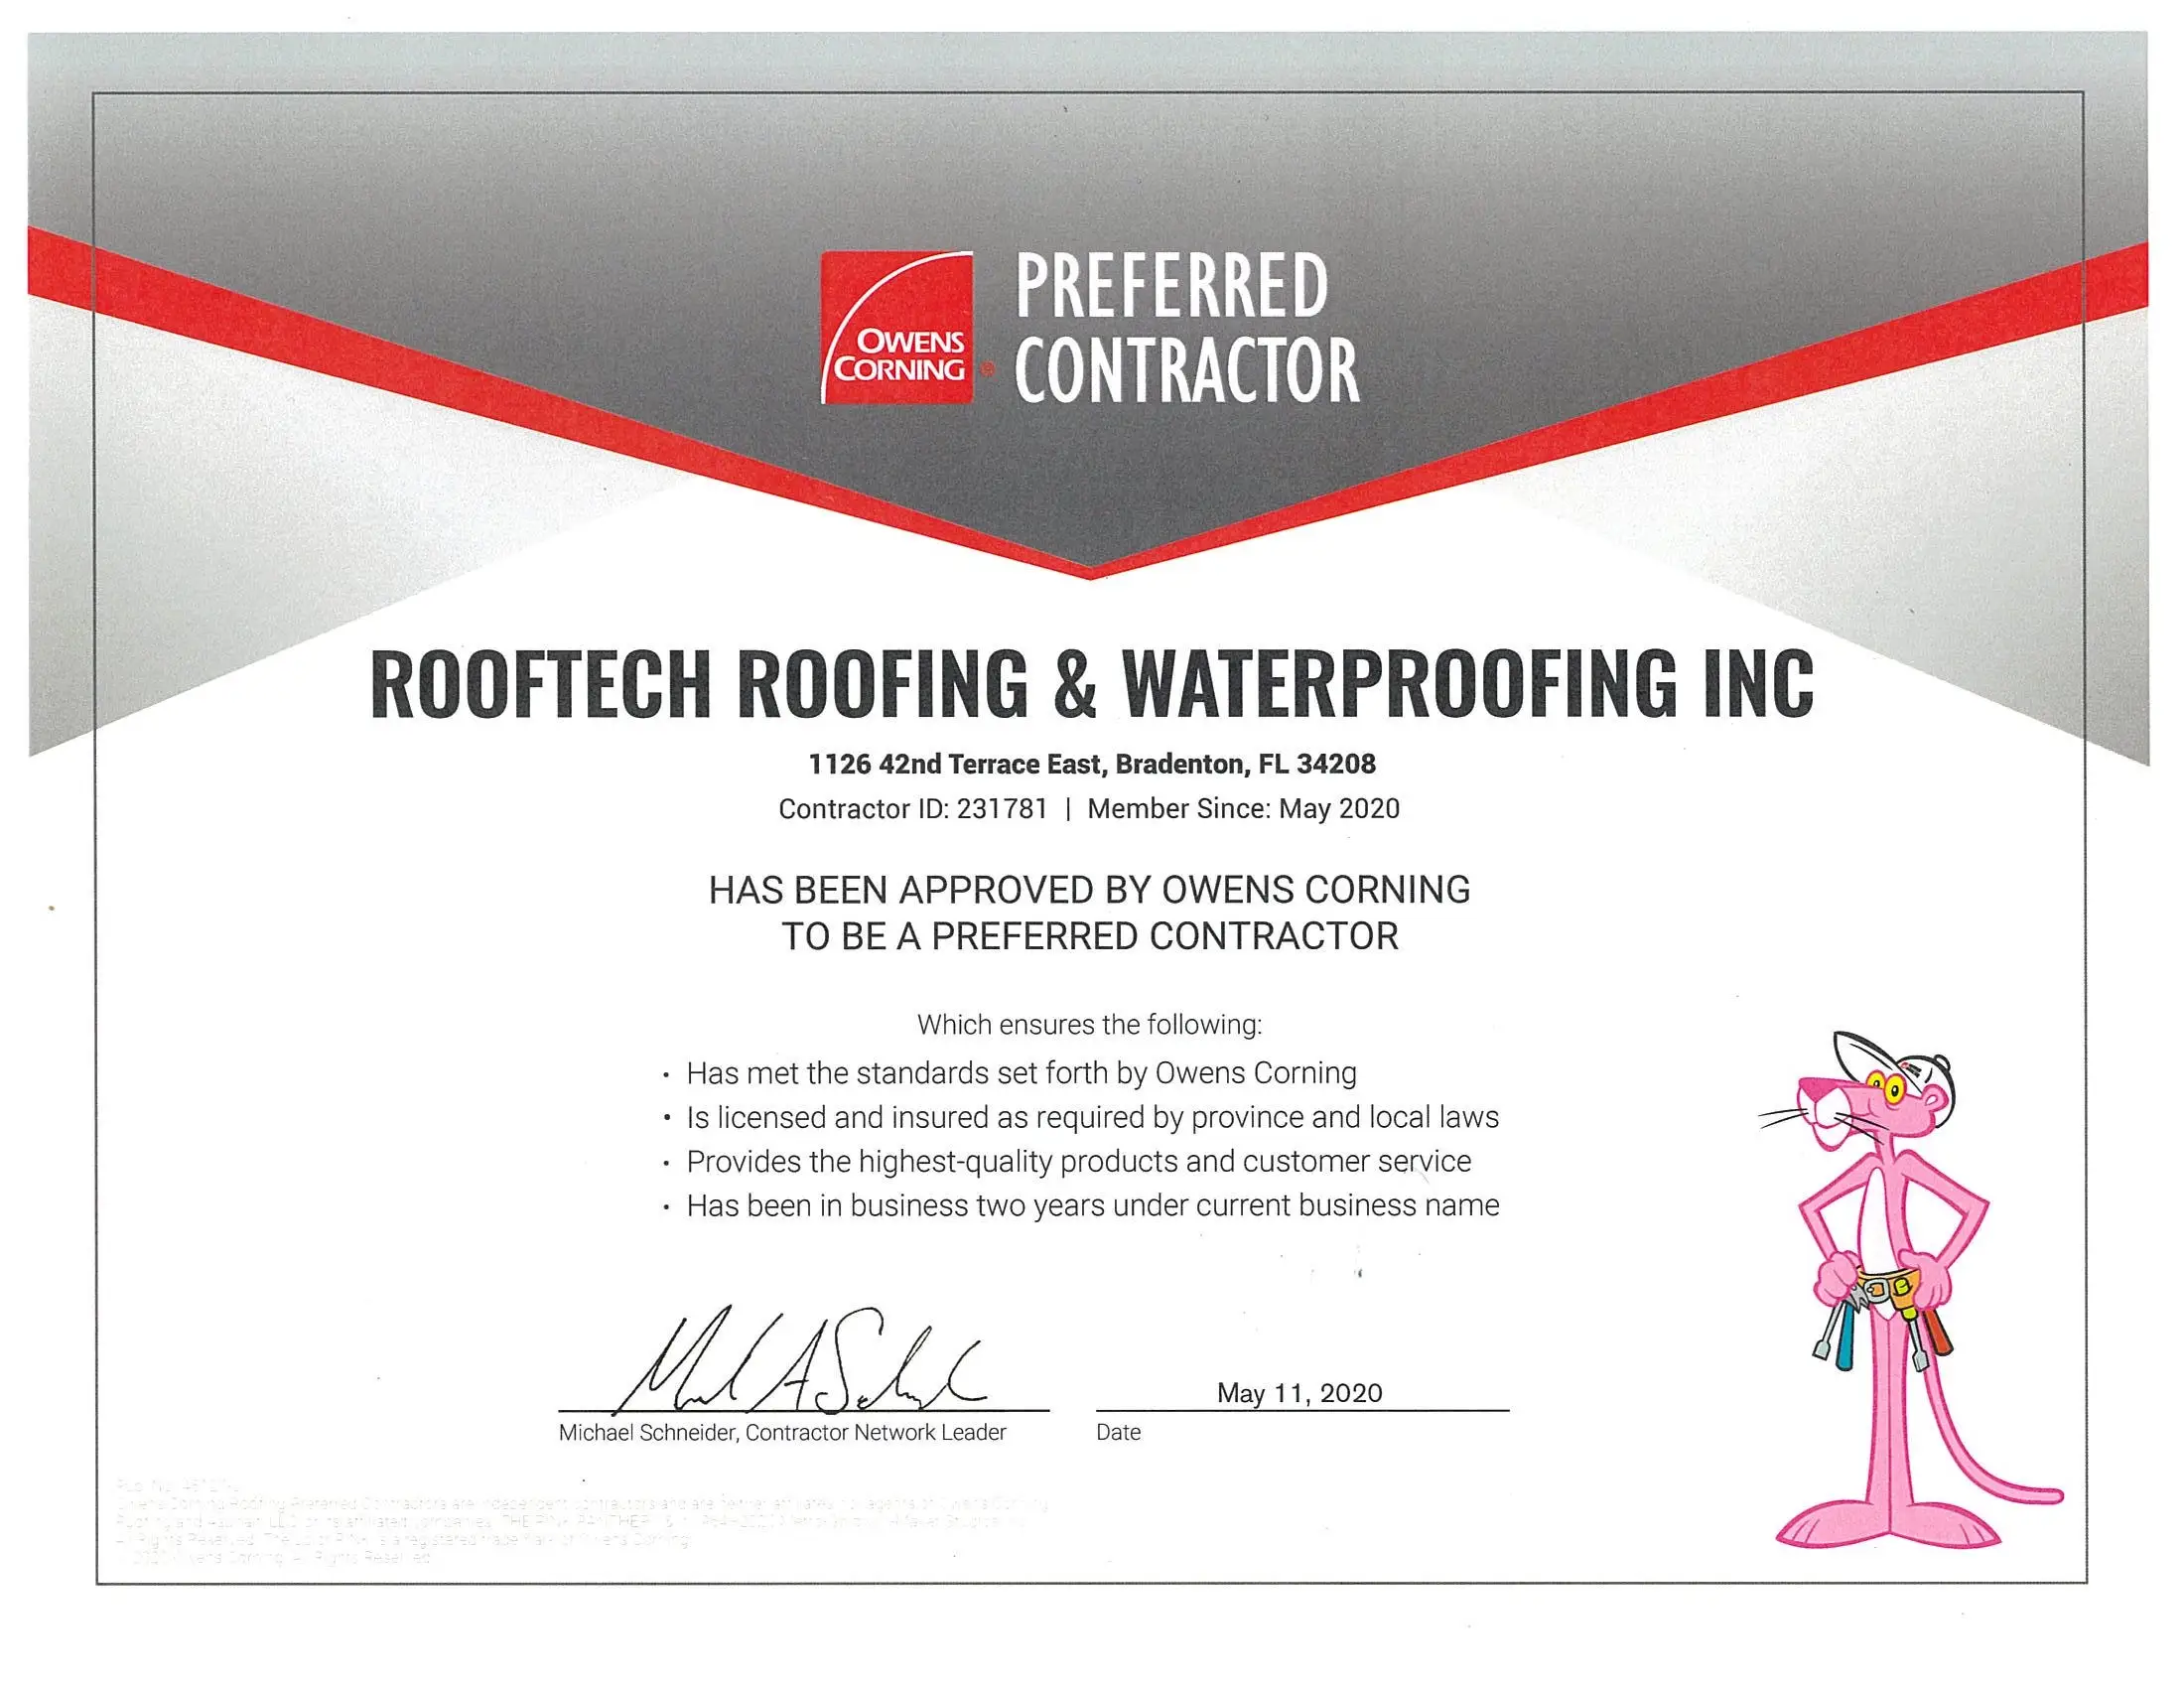 rooftech roofing and waterproofing oc certification